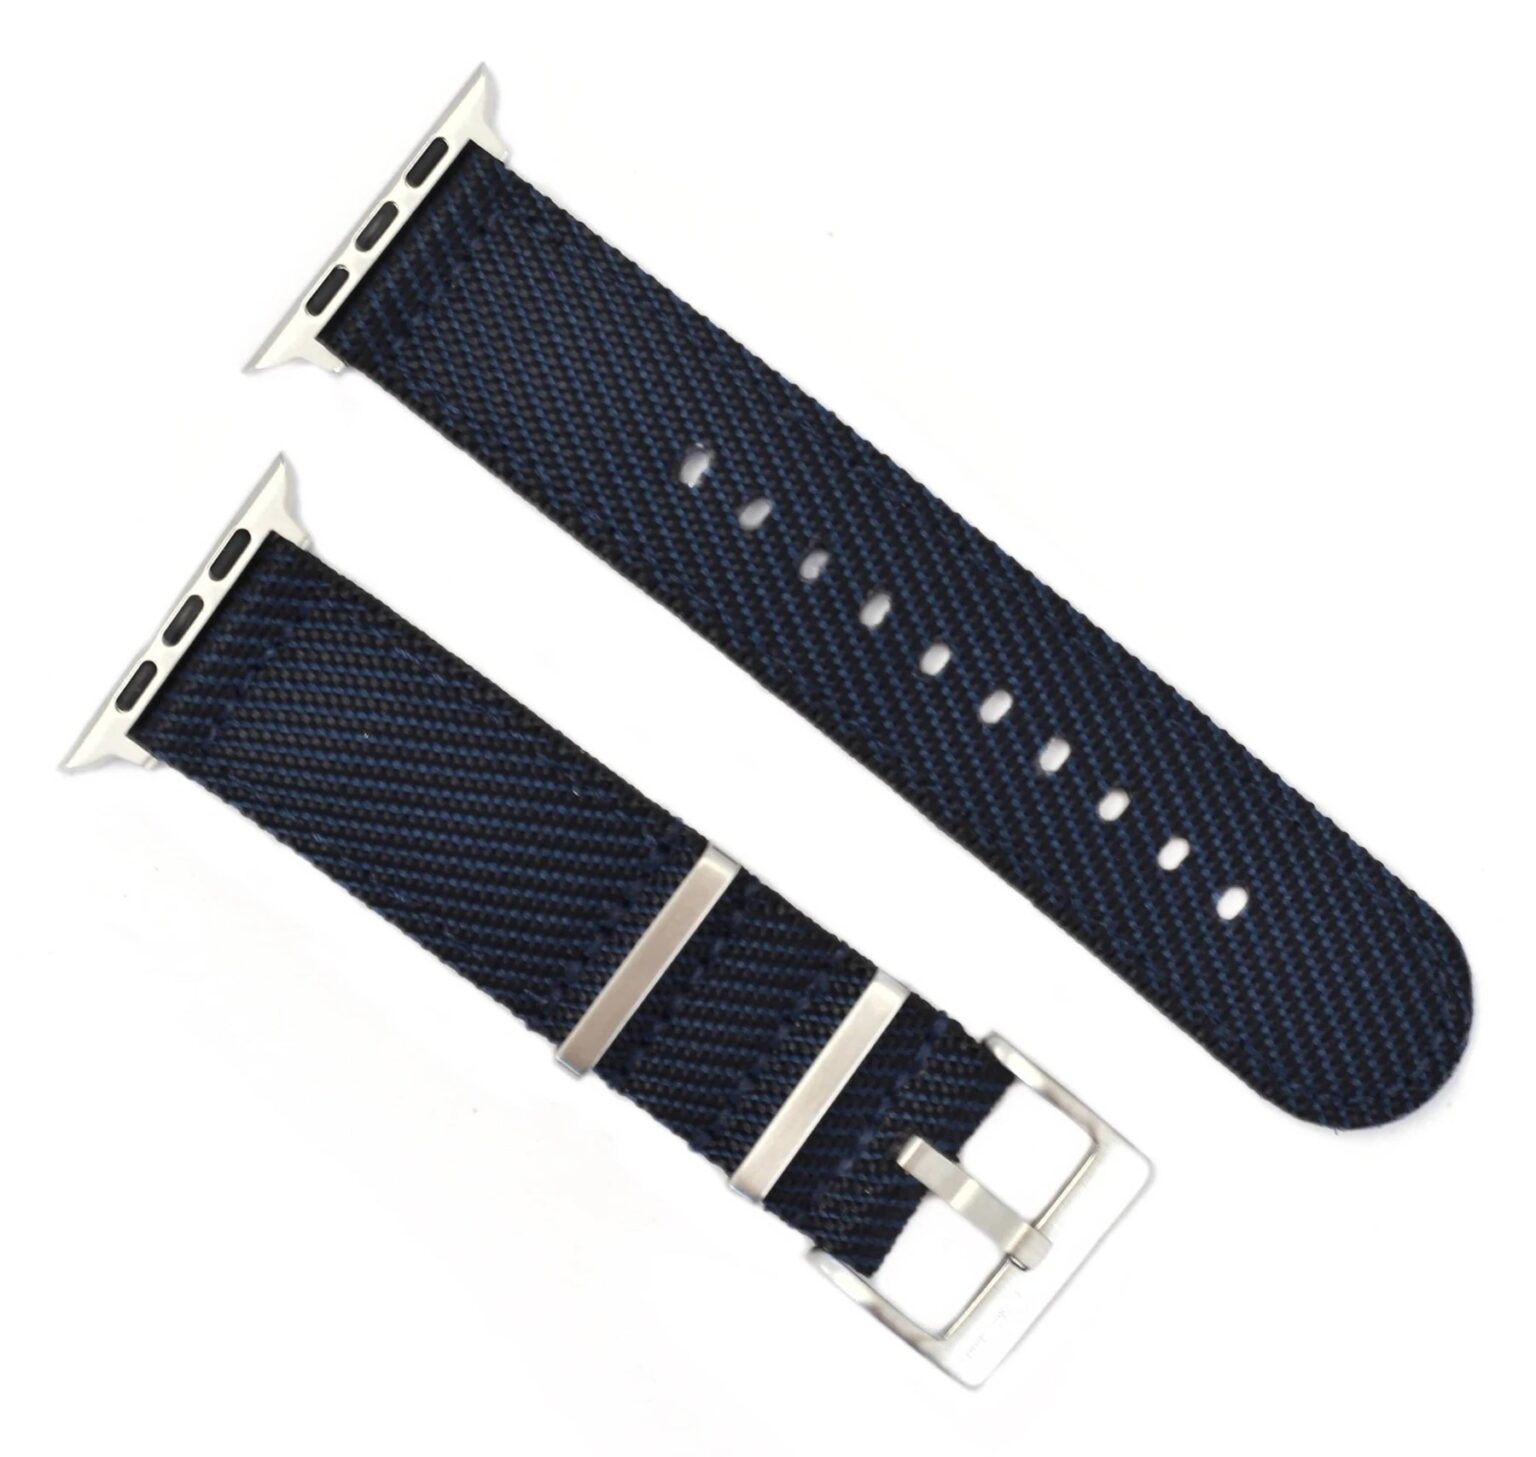 This BluShark Knit Weave Apple Watch Band is in the color 